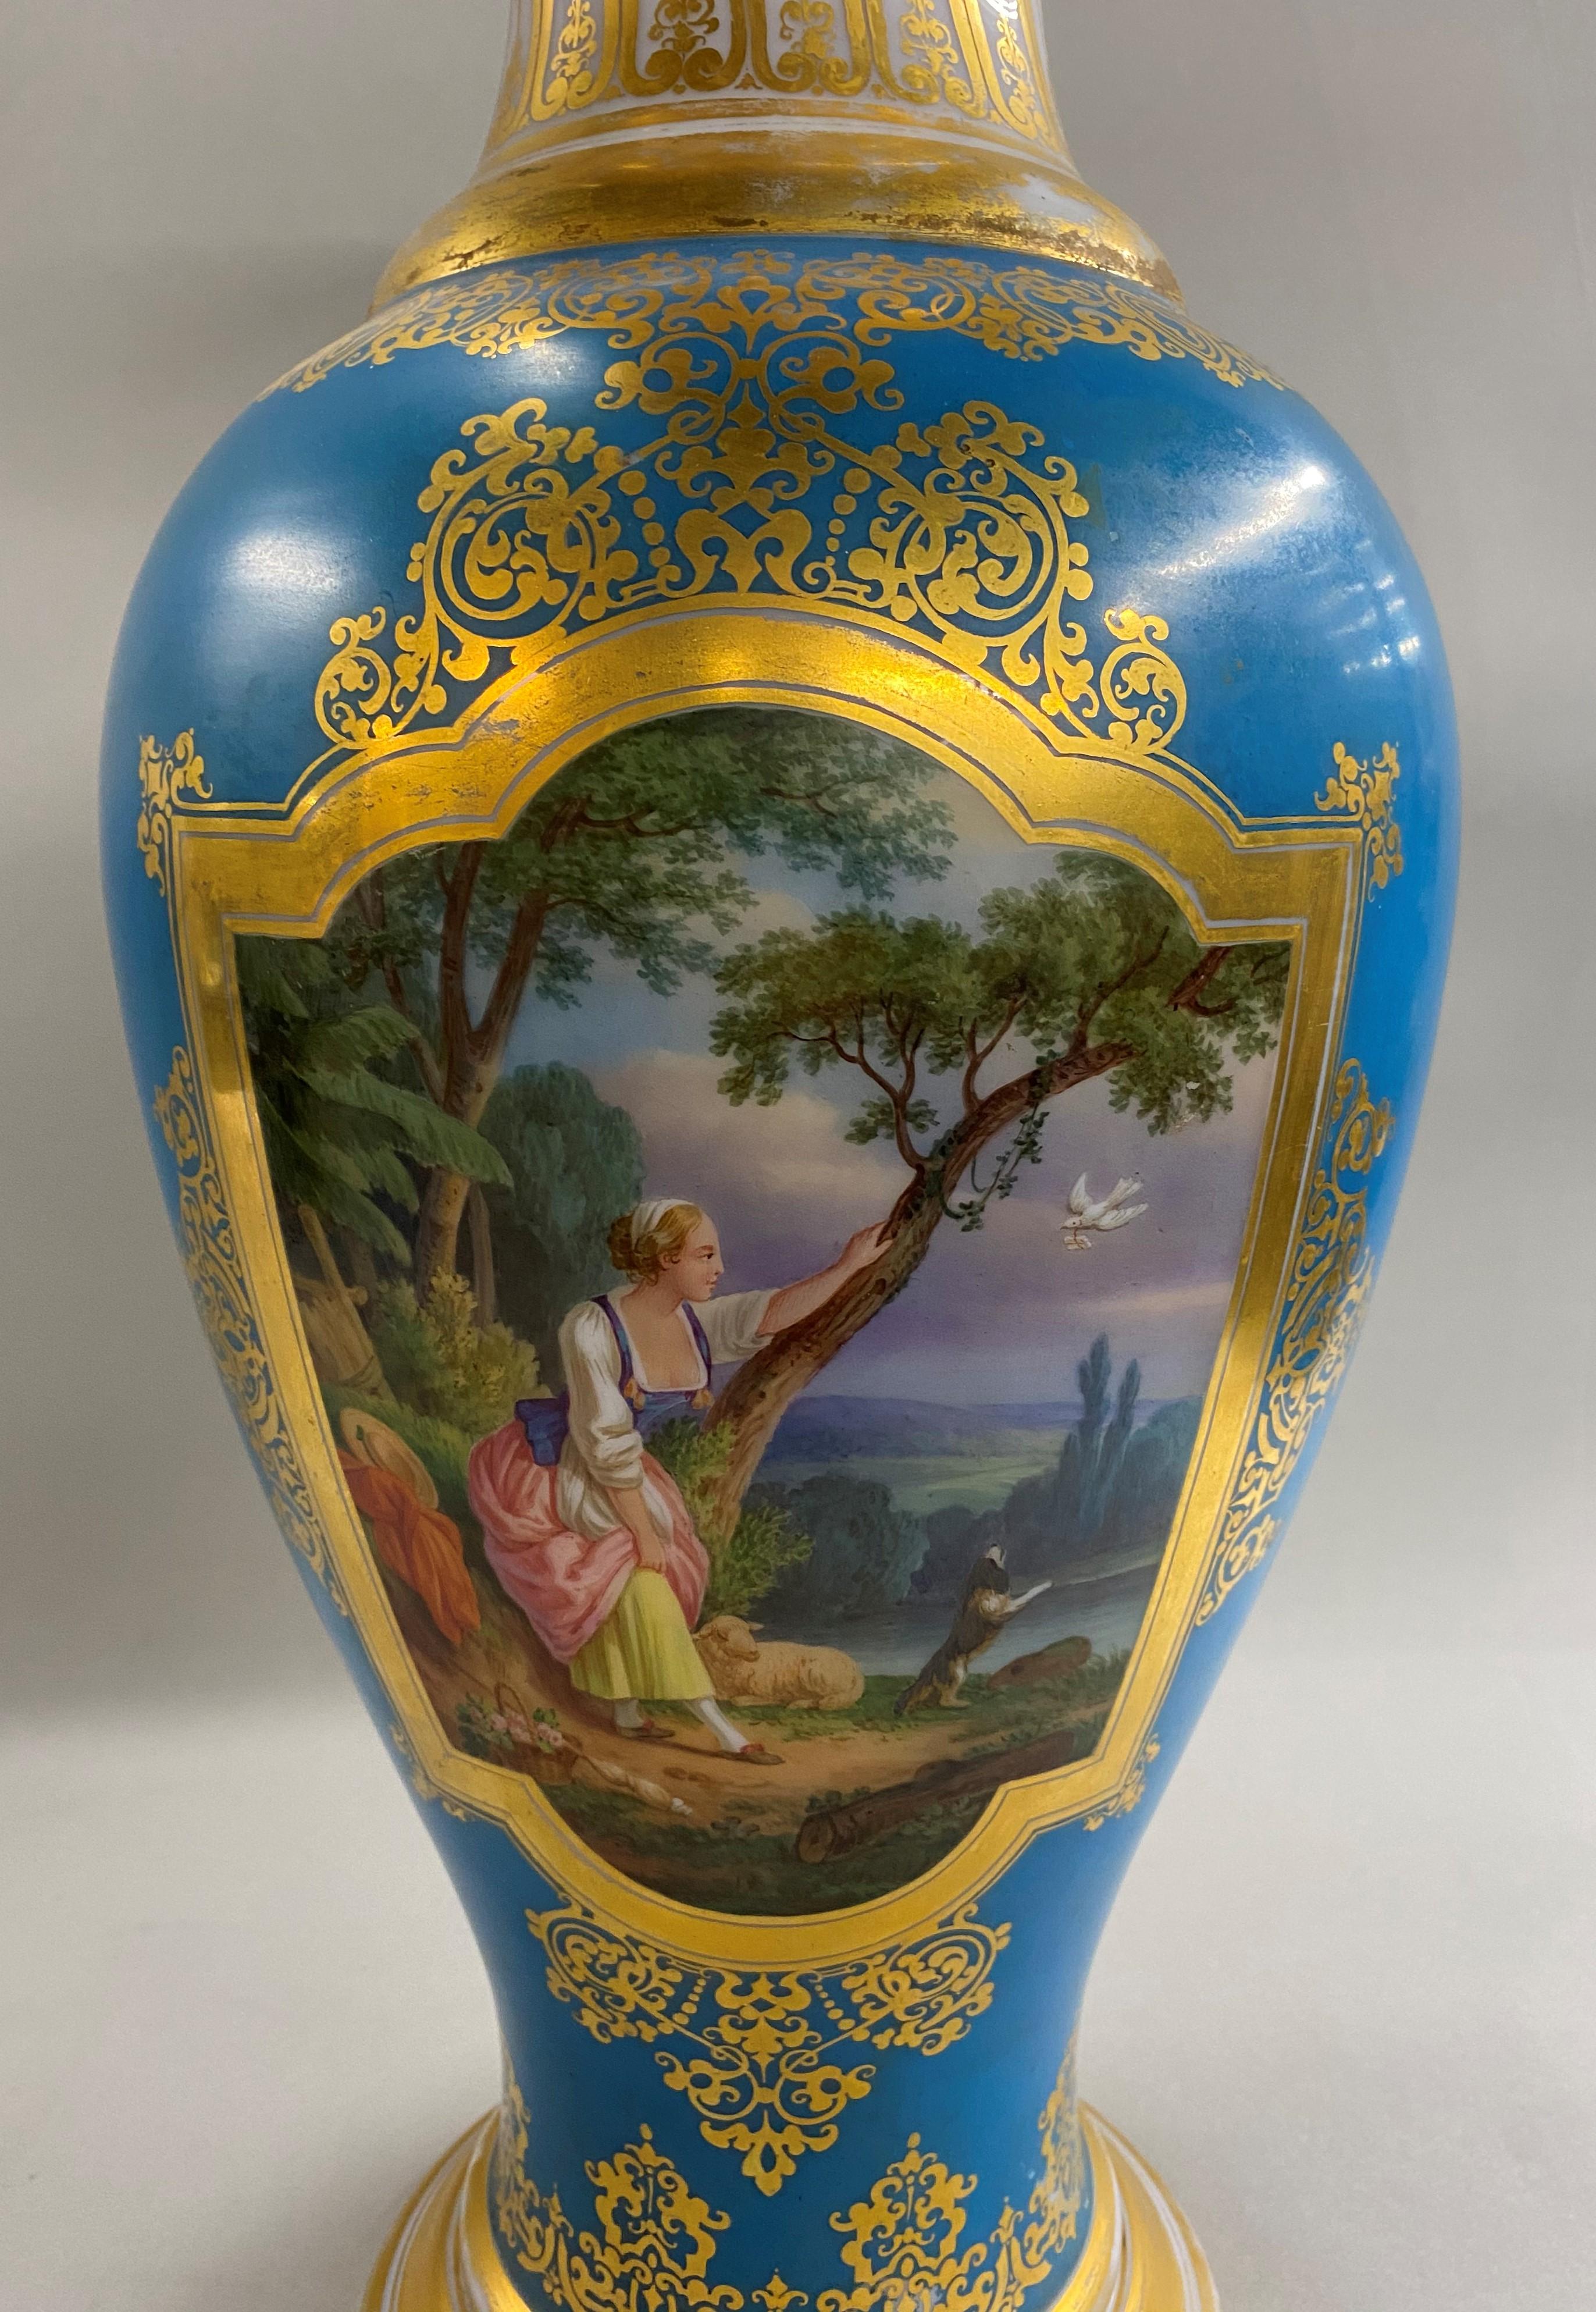 A beautiful palace size French Baccarat opaline glass baluster form vase, circa 1880, with fine hand painted genre and foliate panels in white opal crystal with polychrome enamels on a blue background, unsigned, with gilt swirl highlights on the rim